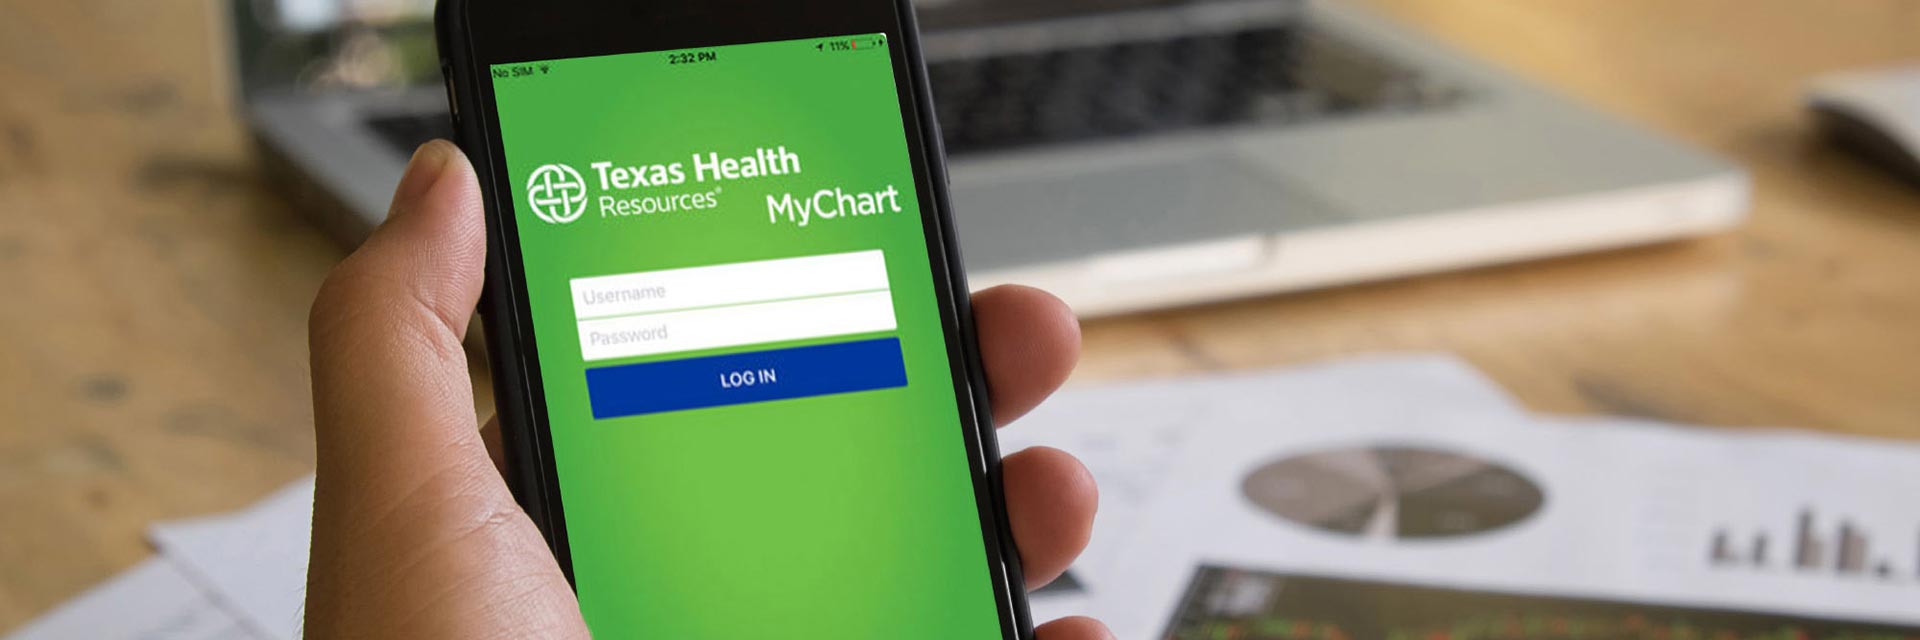 Learn More About MyChart Image